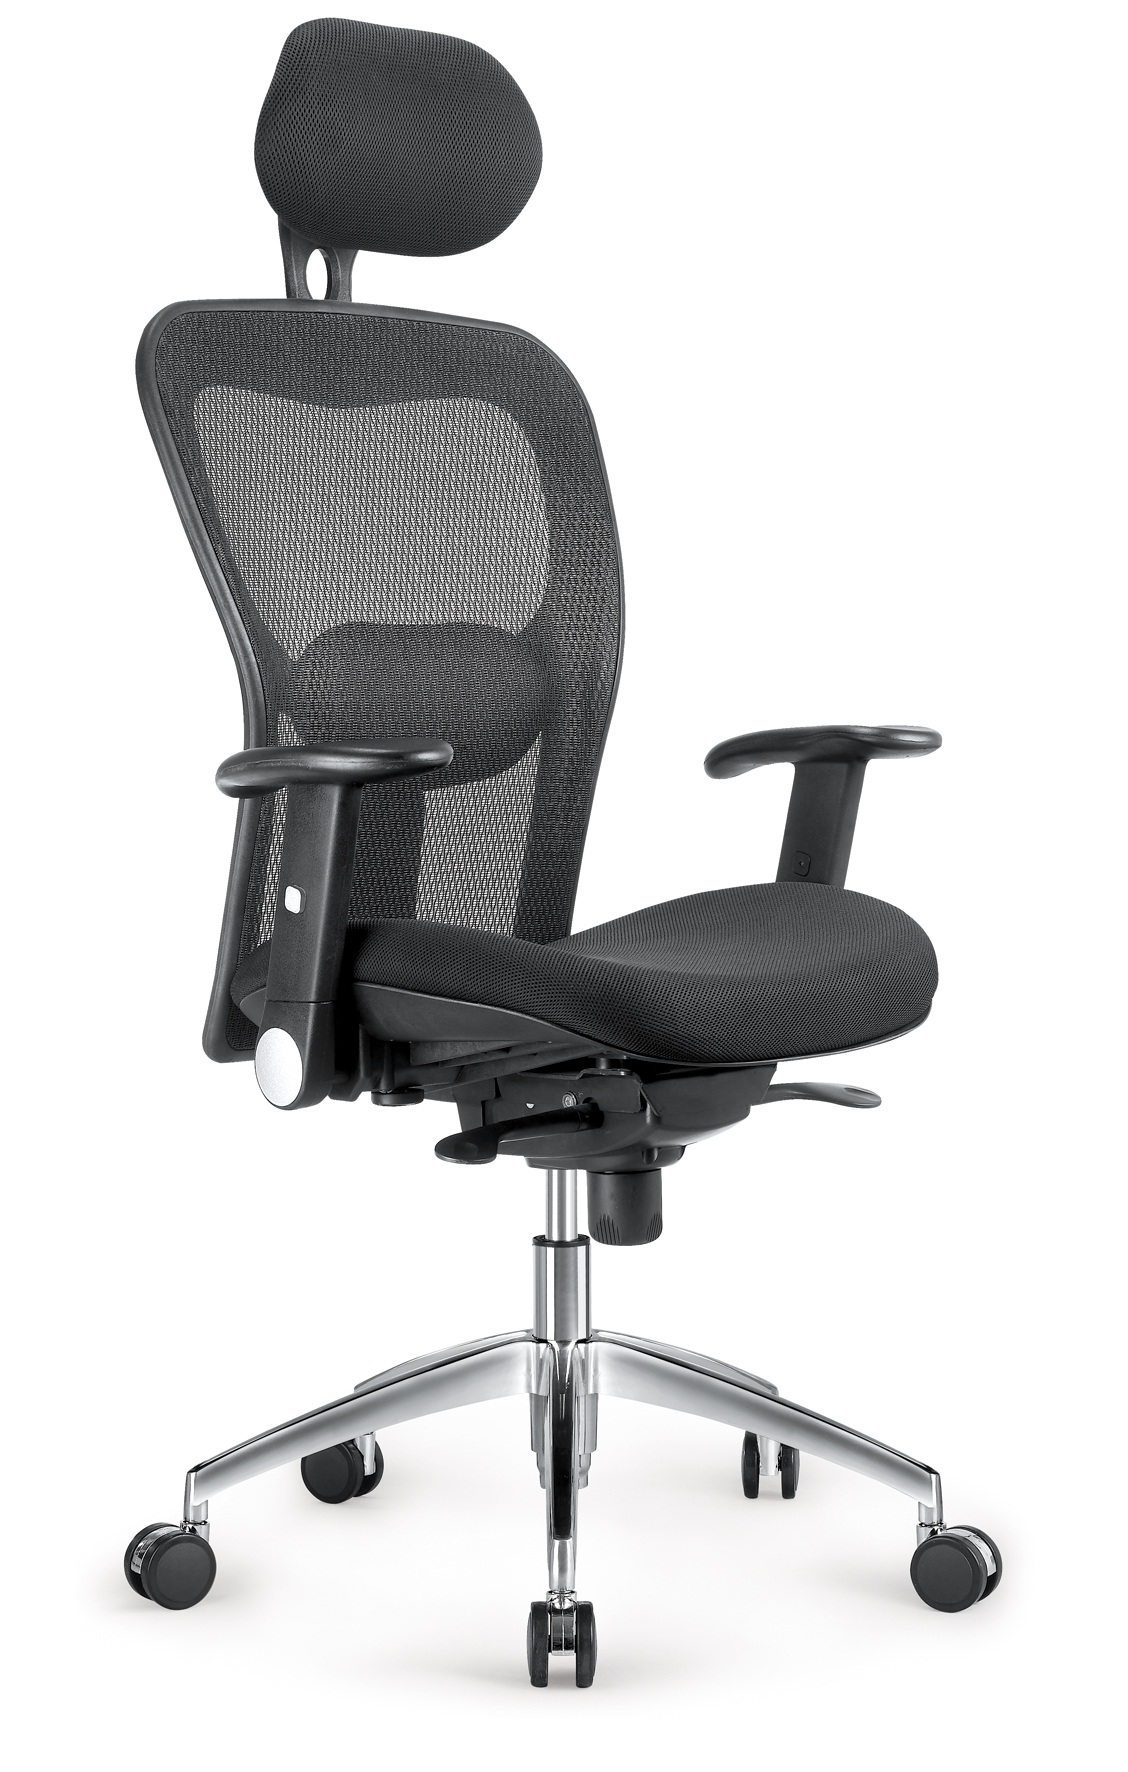 OEM good quality low price mesh office chair with headrest